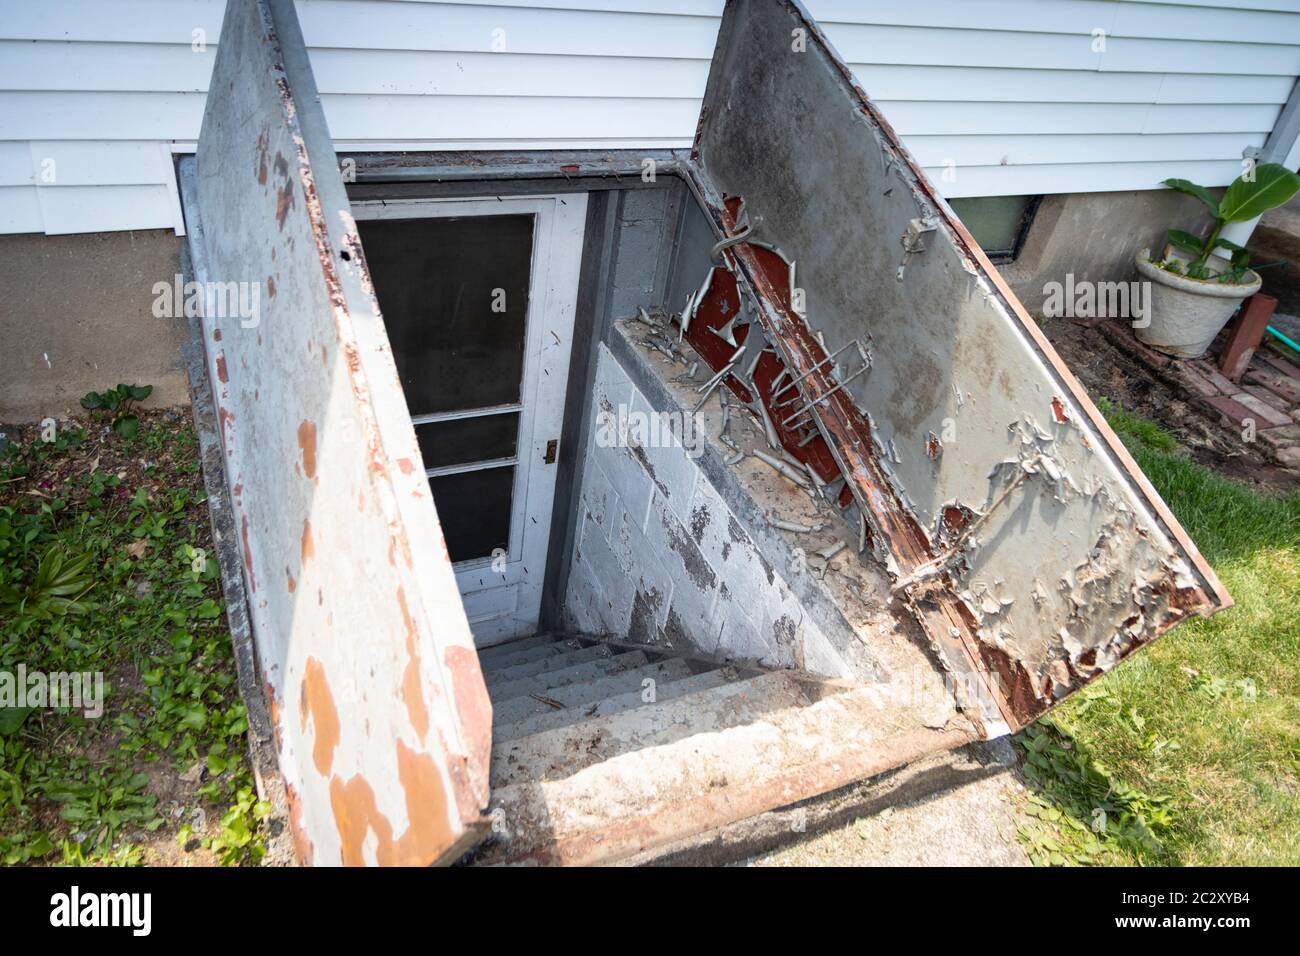 View of cellar doors known as 'Bilco Doors', with paint damage and rust from years of weather, sun, and rain Stock Photo